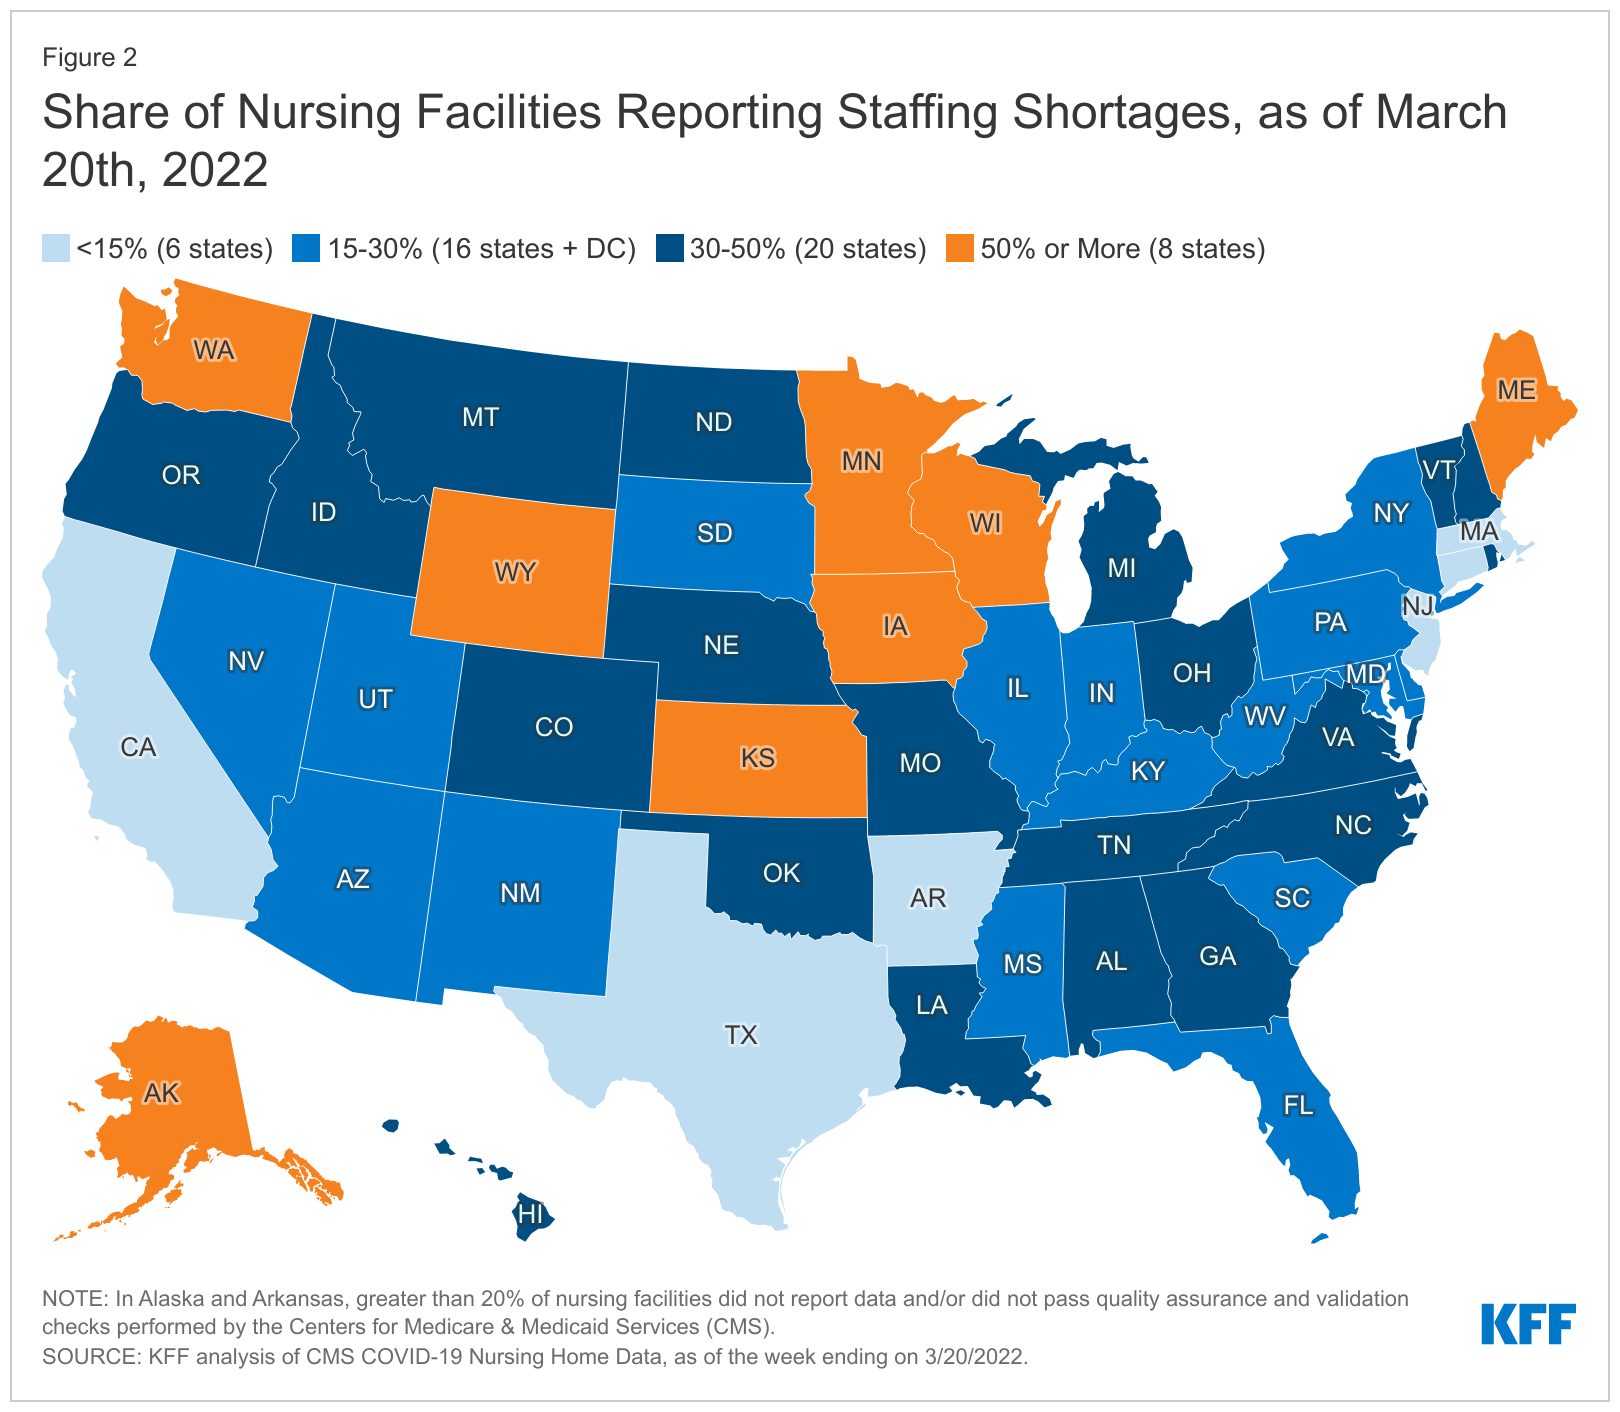 Nursing Facility Staffing Shortages During the COVID-19 Pandemic